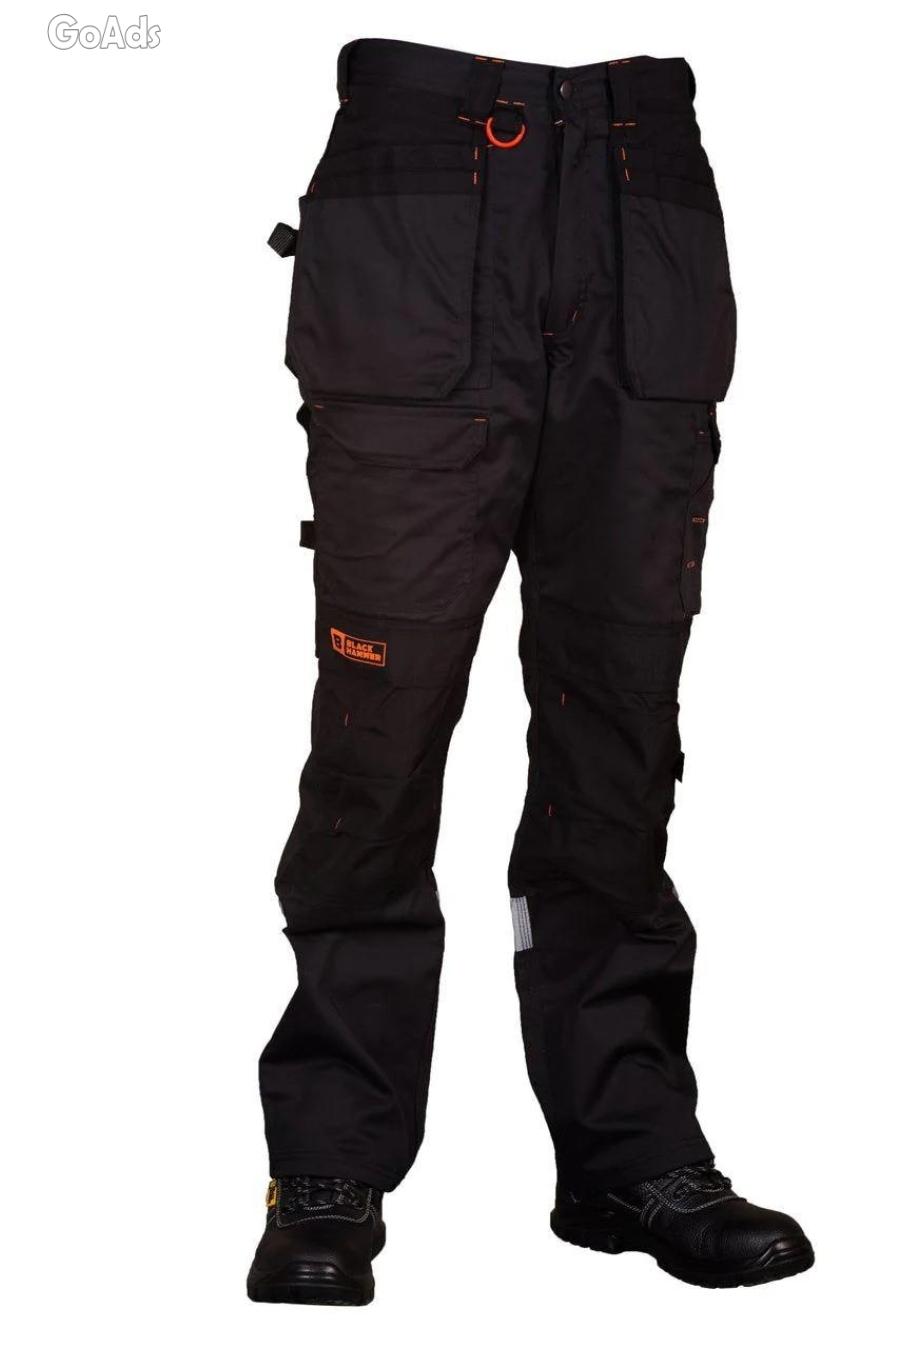 Gear Up for Efficiency - Mens Cargo Work Trousers